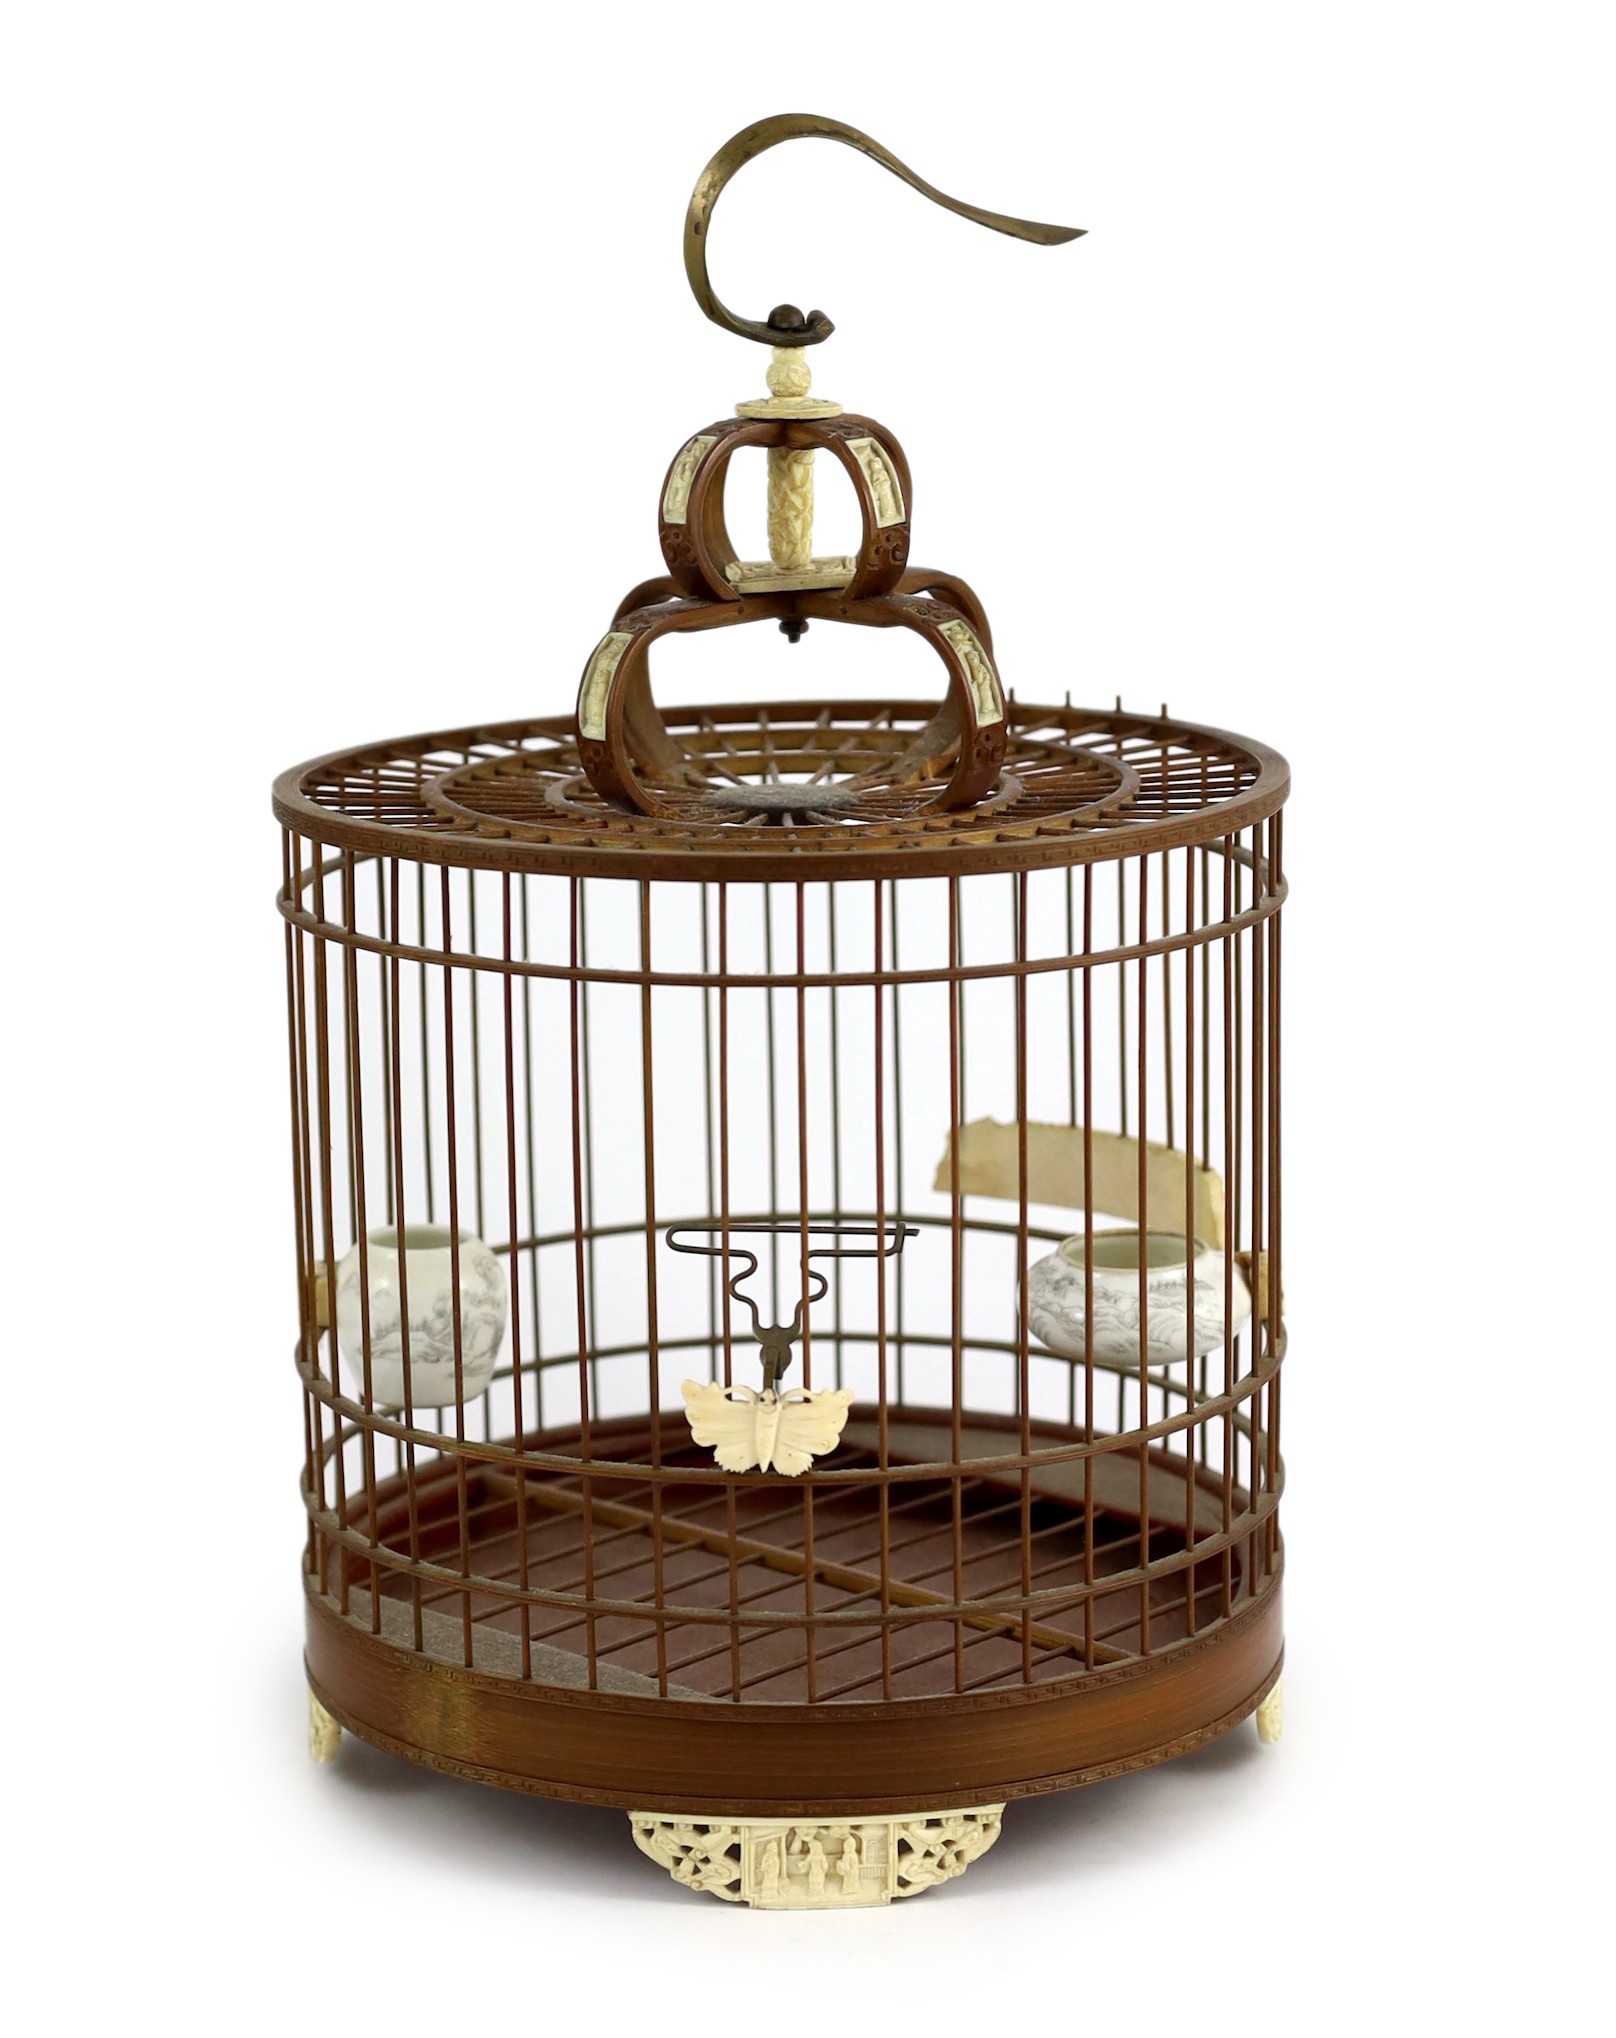 A Chinese bamboo and Guangzhou ivory mounted bird cage, late Qing dynasty, with two Guangxu mark and period porcelain bird feeders (1875-1908), cage 32.5cm high to top of handle